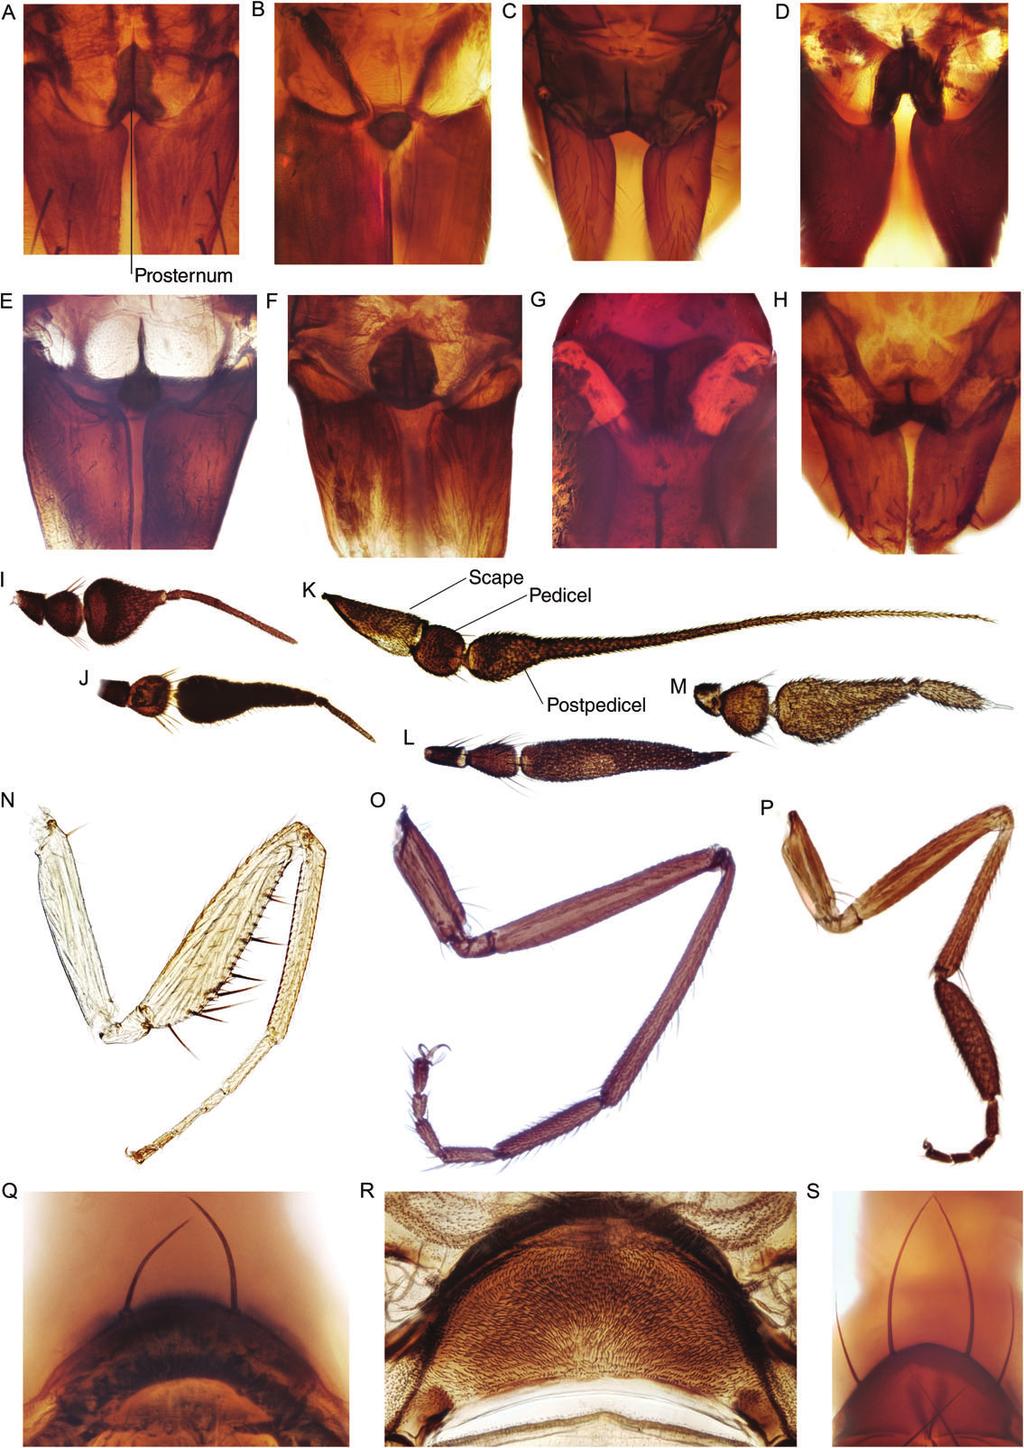 12 E. Wahlberg and K. A. Johanson Fig. 7. Detailed photos of prosternum, antenna, foreleg and scutellum.